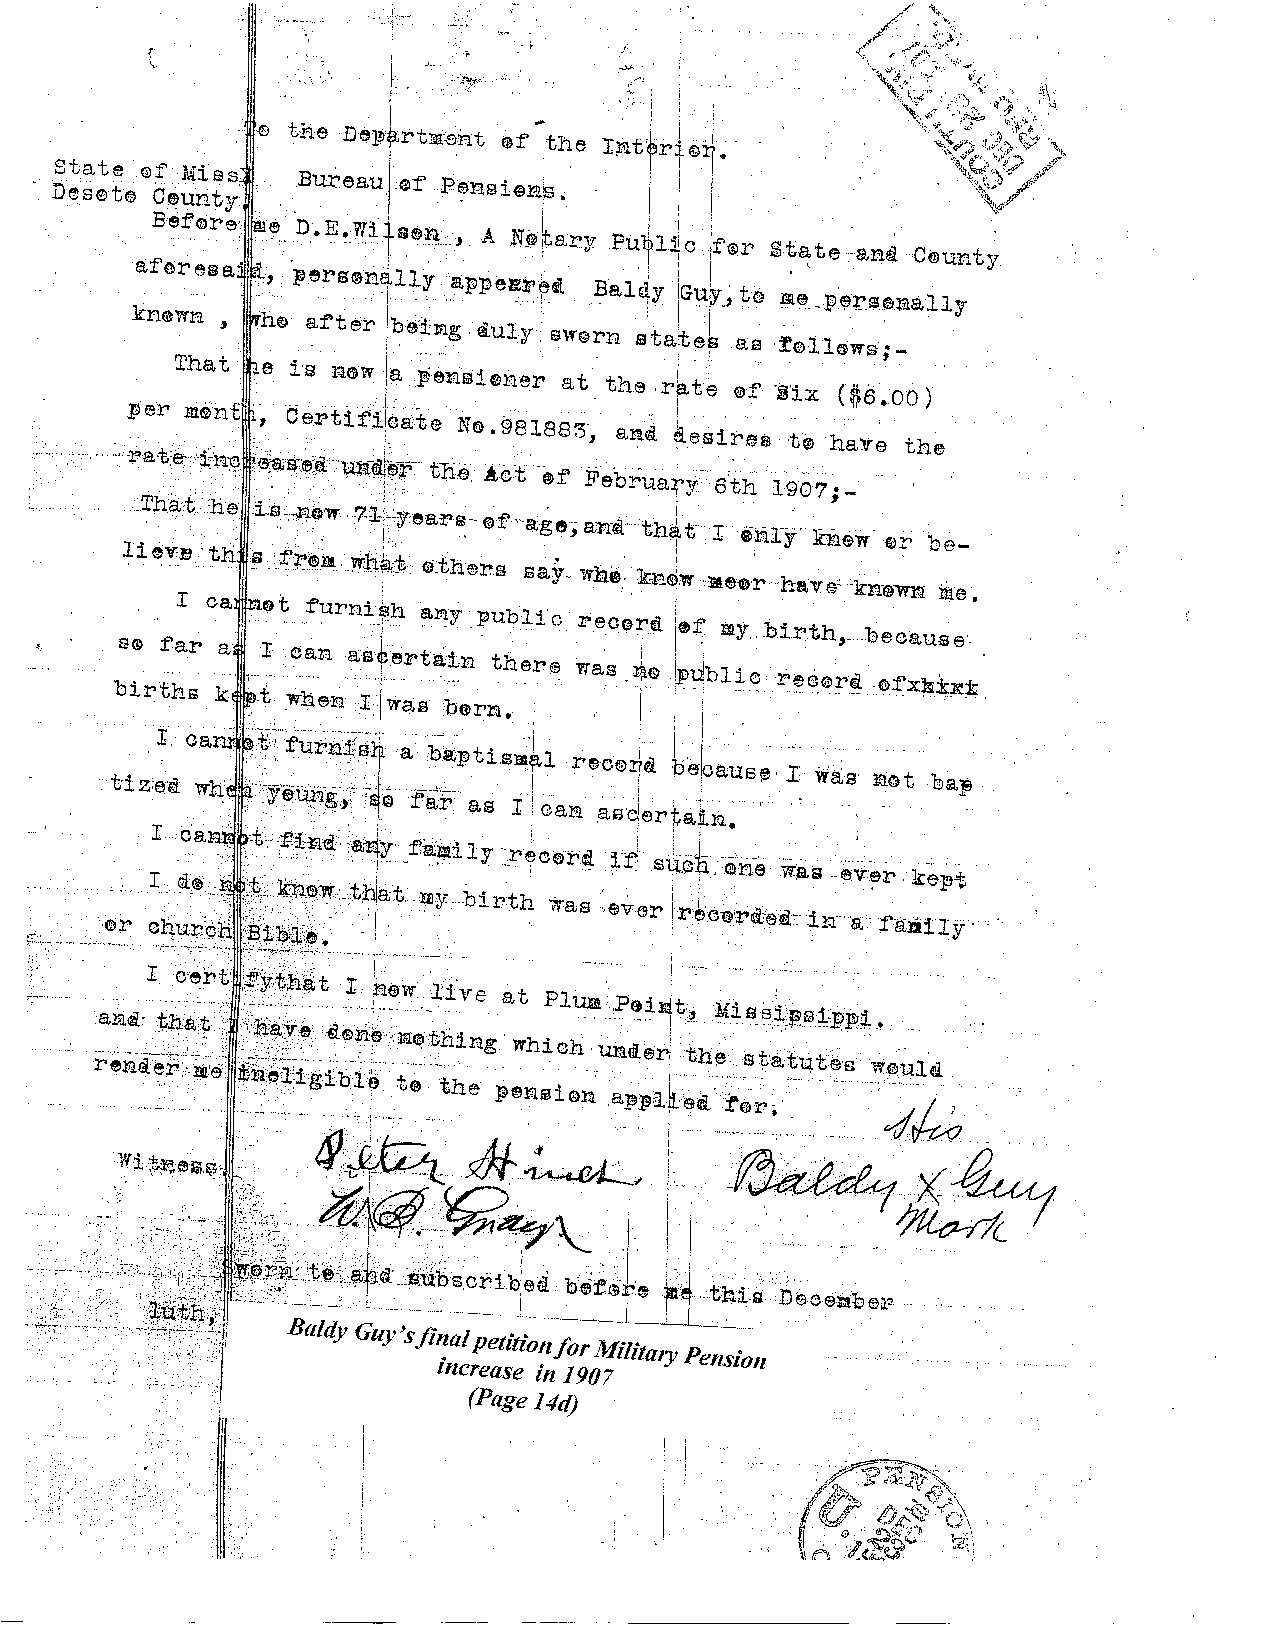 Baldy Guy's final petition for Military Pension increase on December 23, 1907